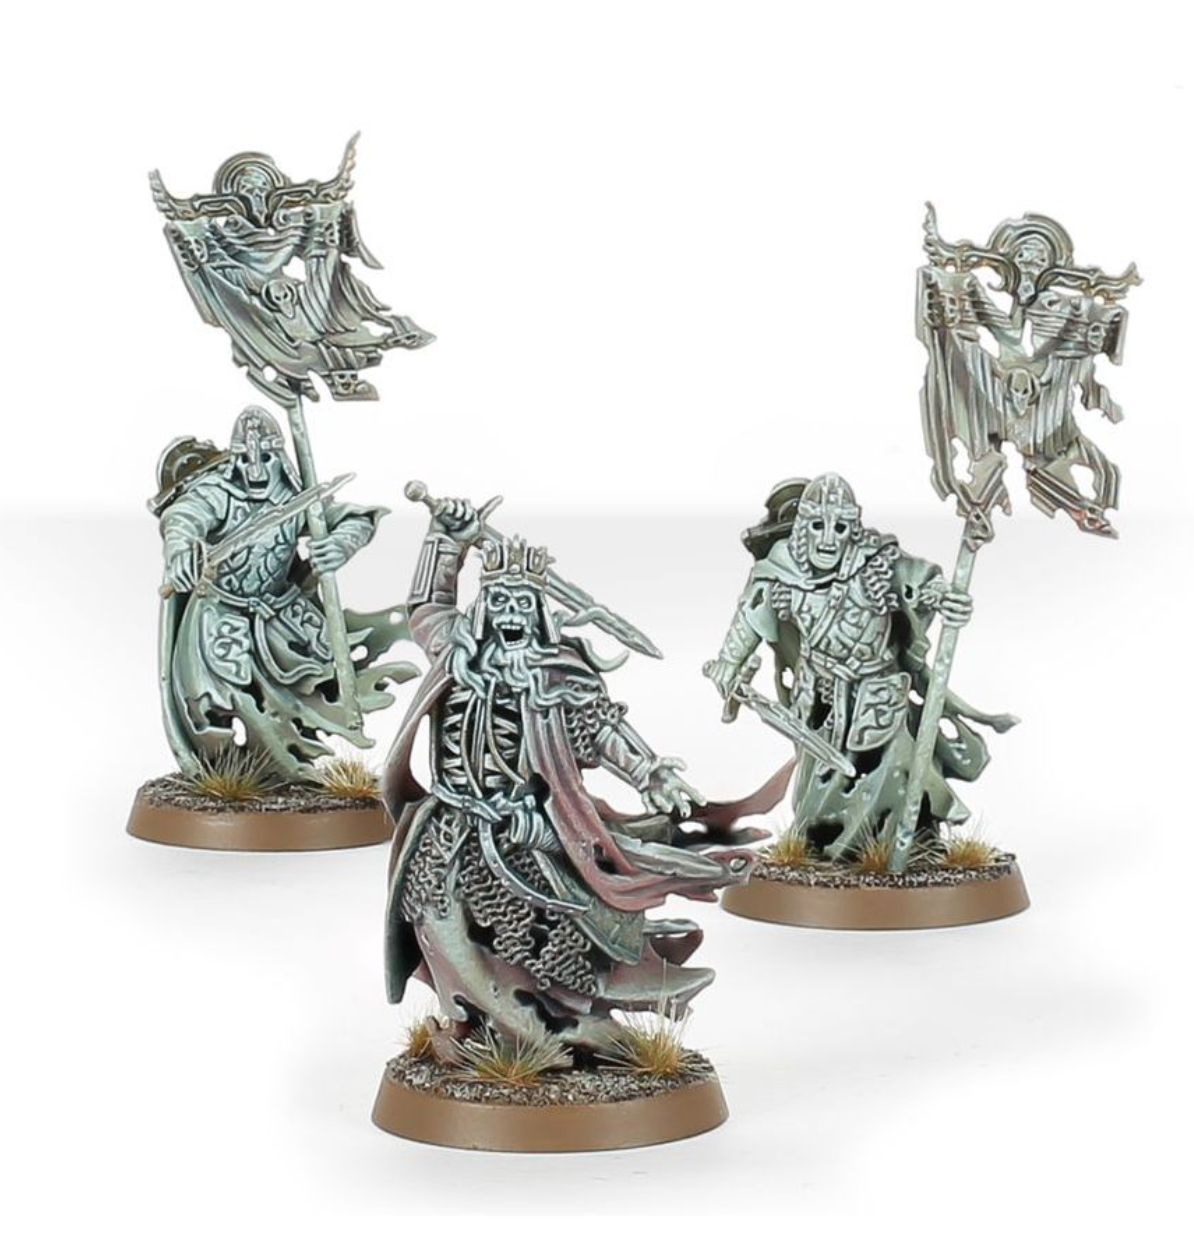 Games Workshop Middle-Earth SBG: King of The Dead and Heralds